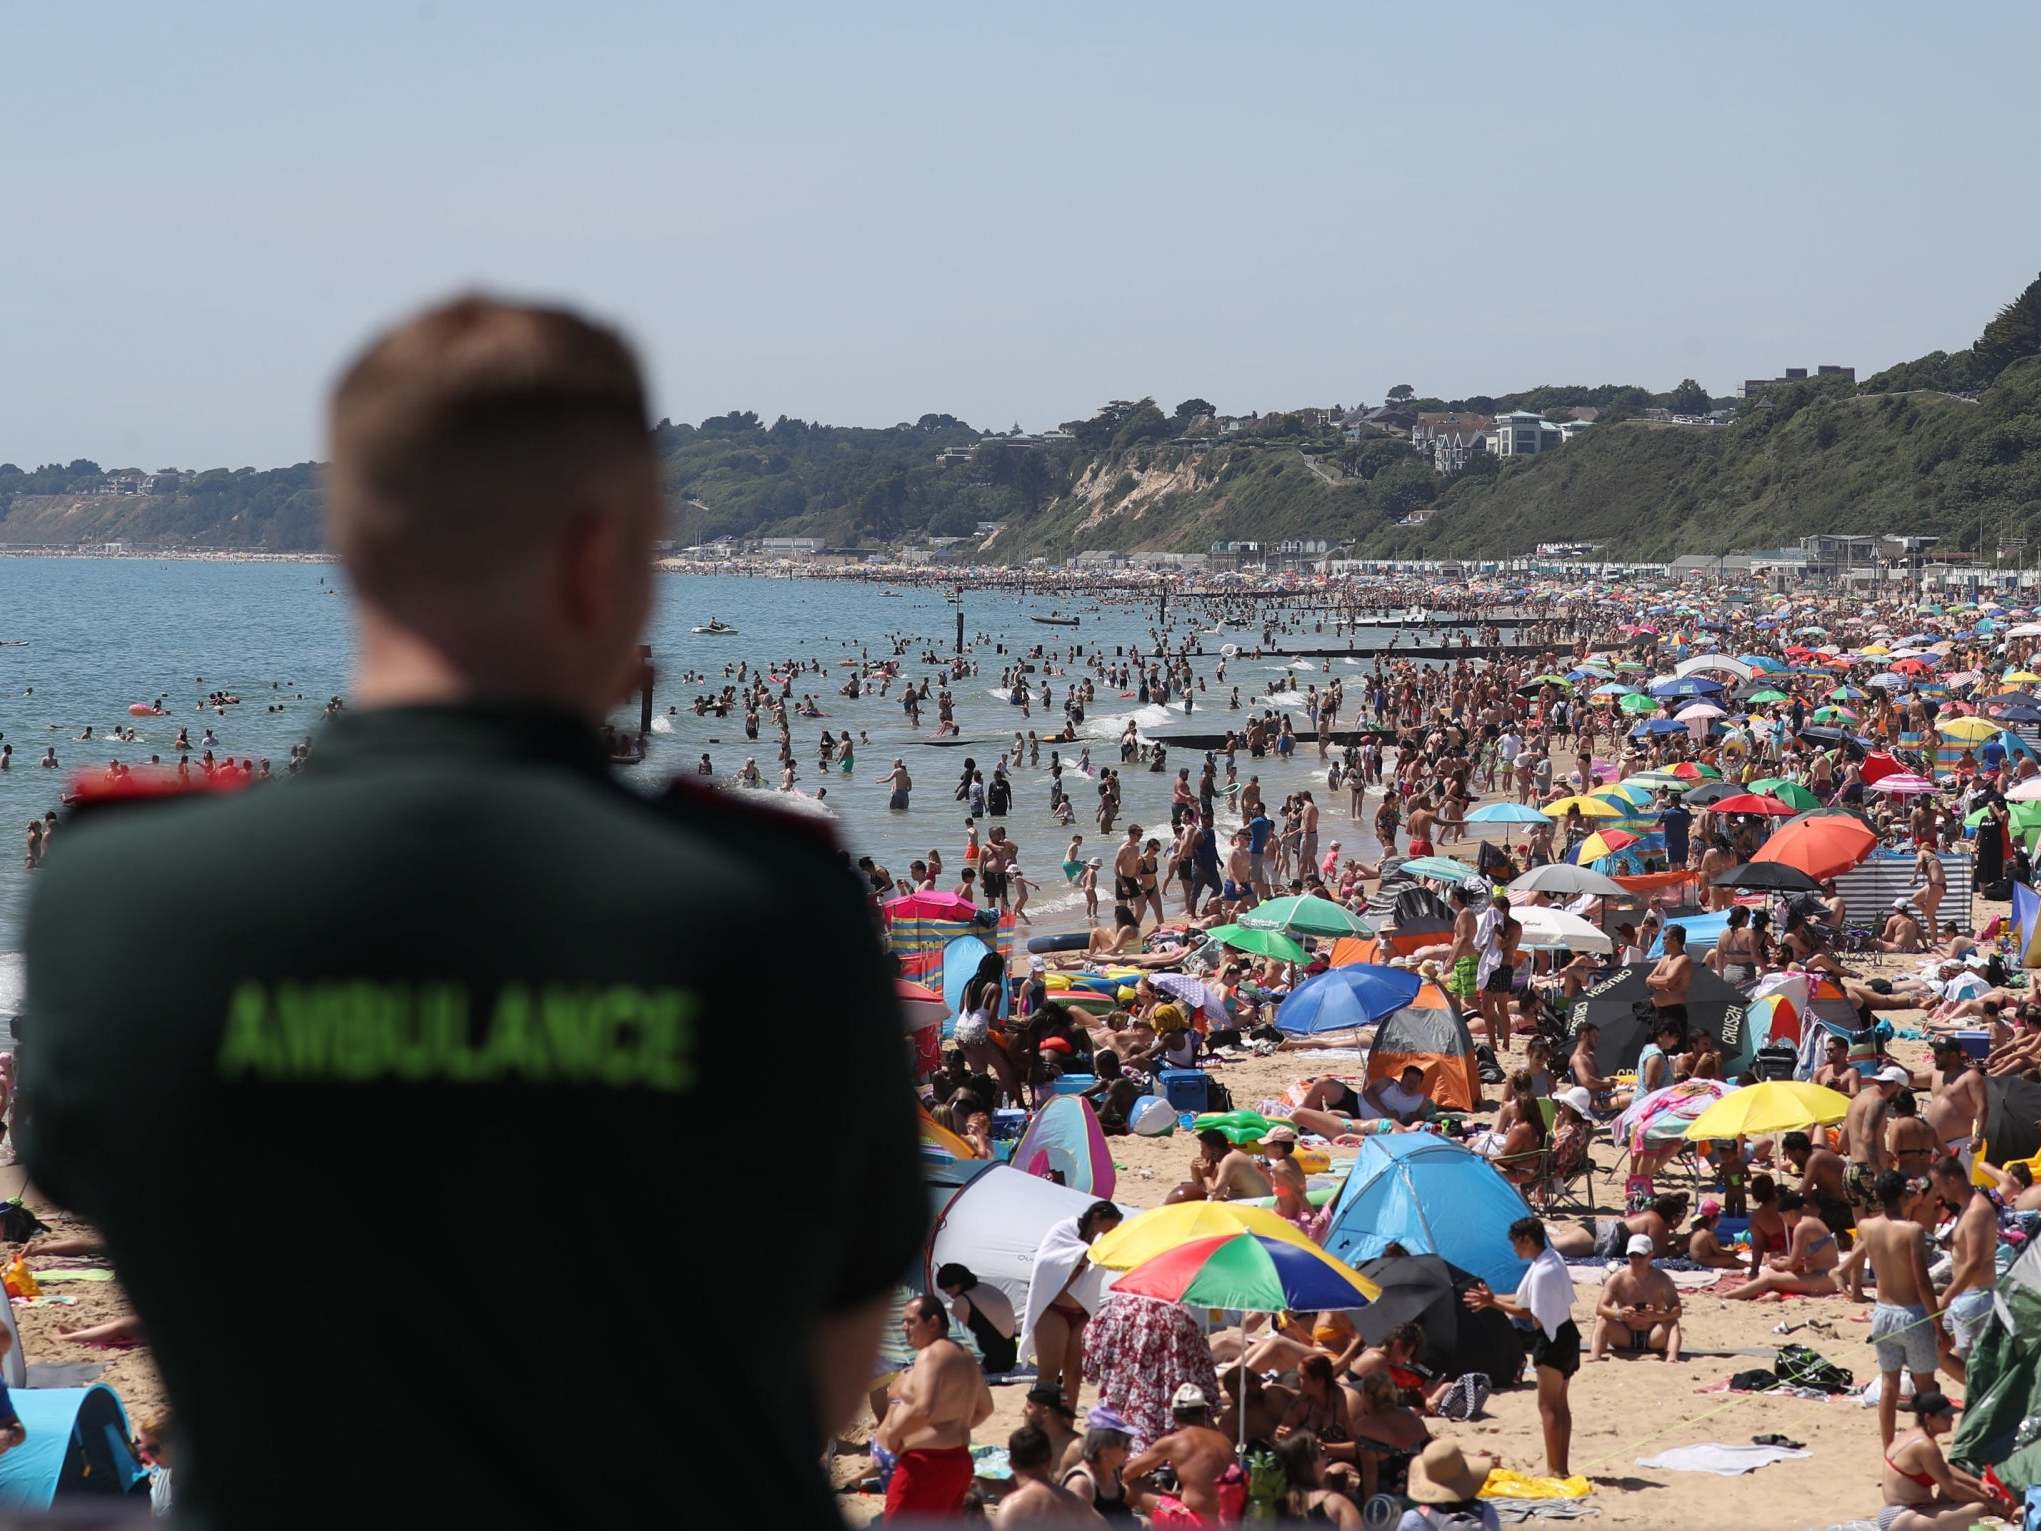 File photo of paramedic looking out on Bournemouth beach during a heatwave on 25 June 2020